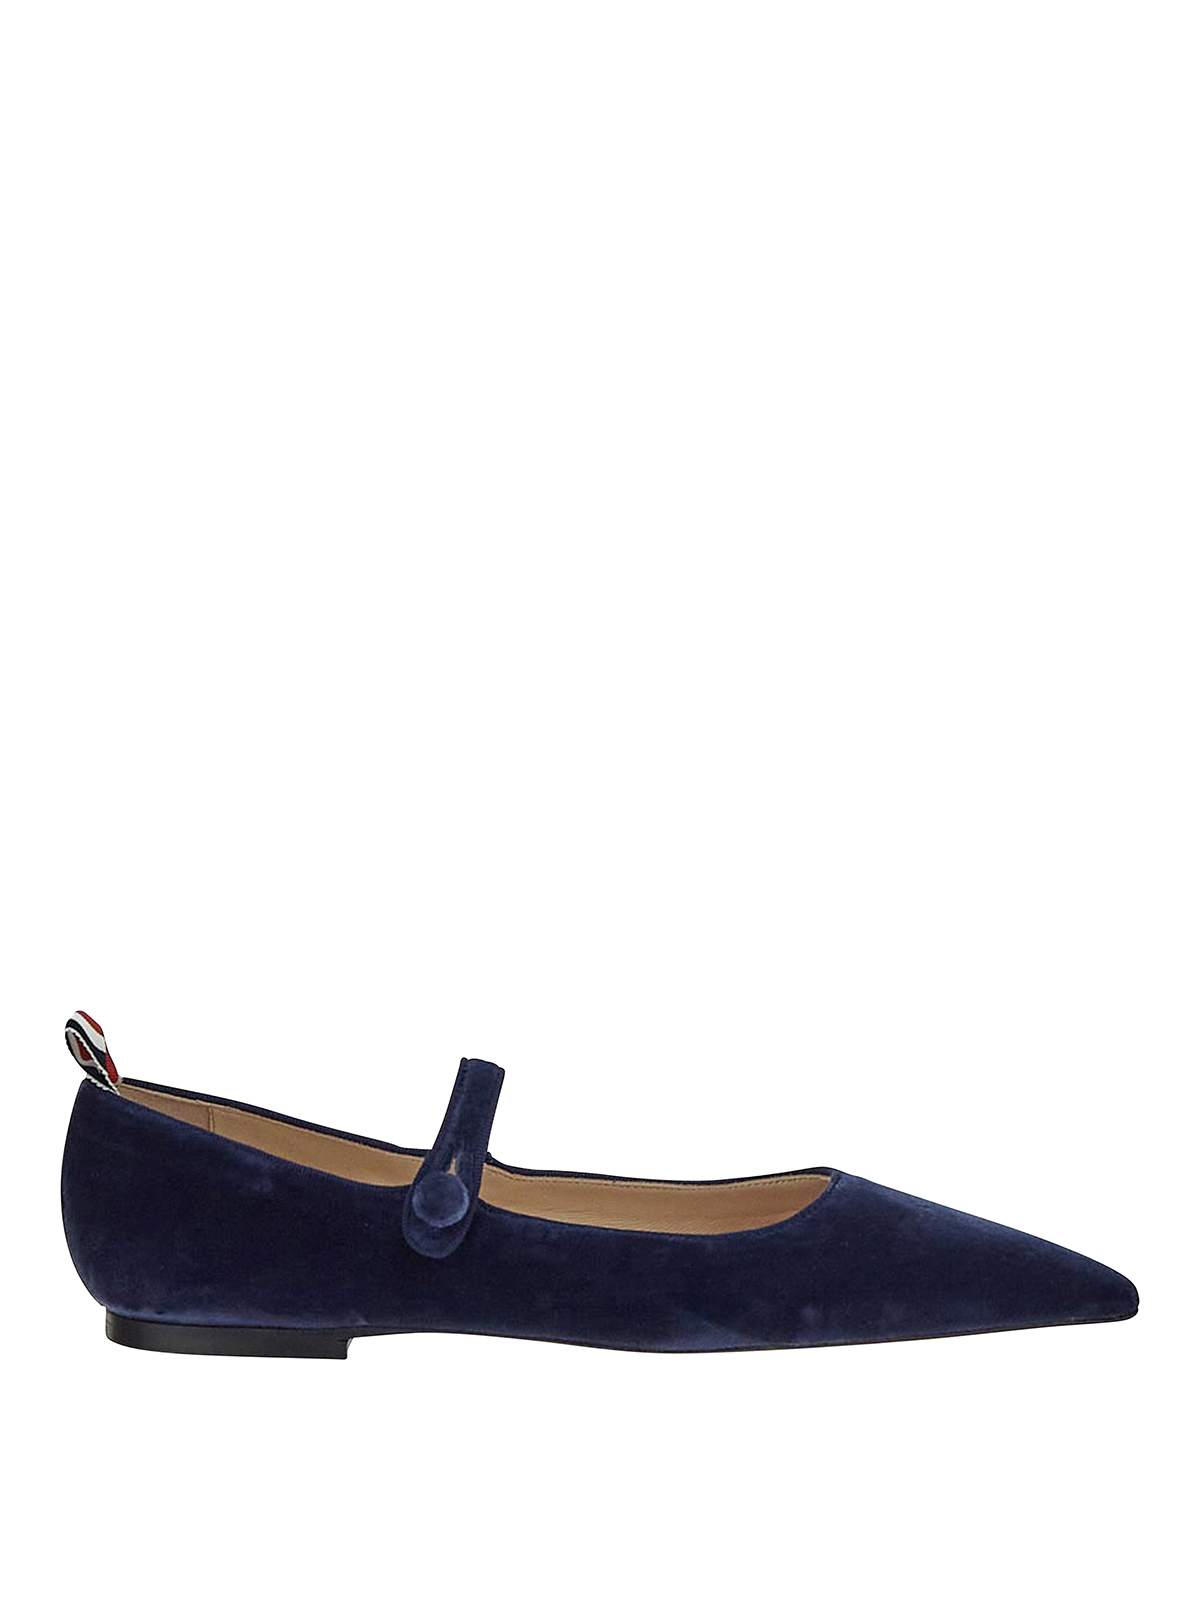 Thom Browne Flat Shoes In Blue